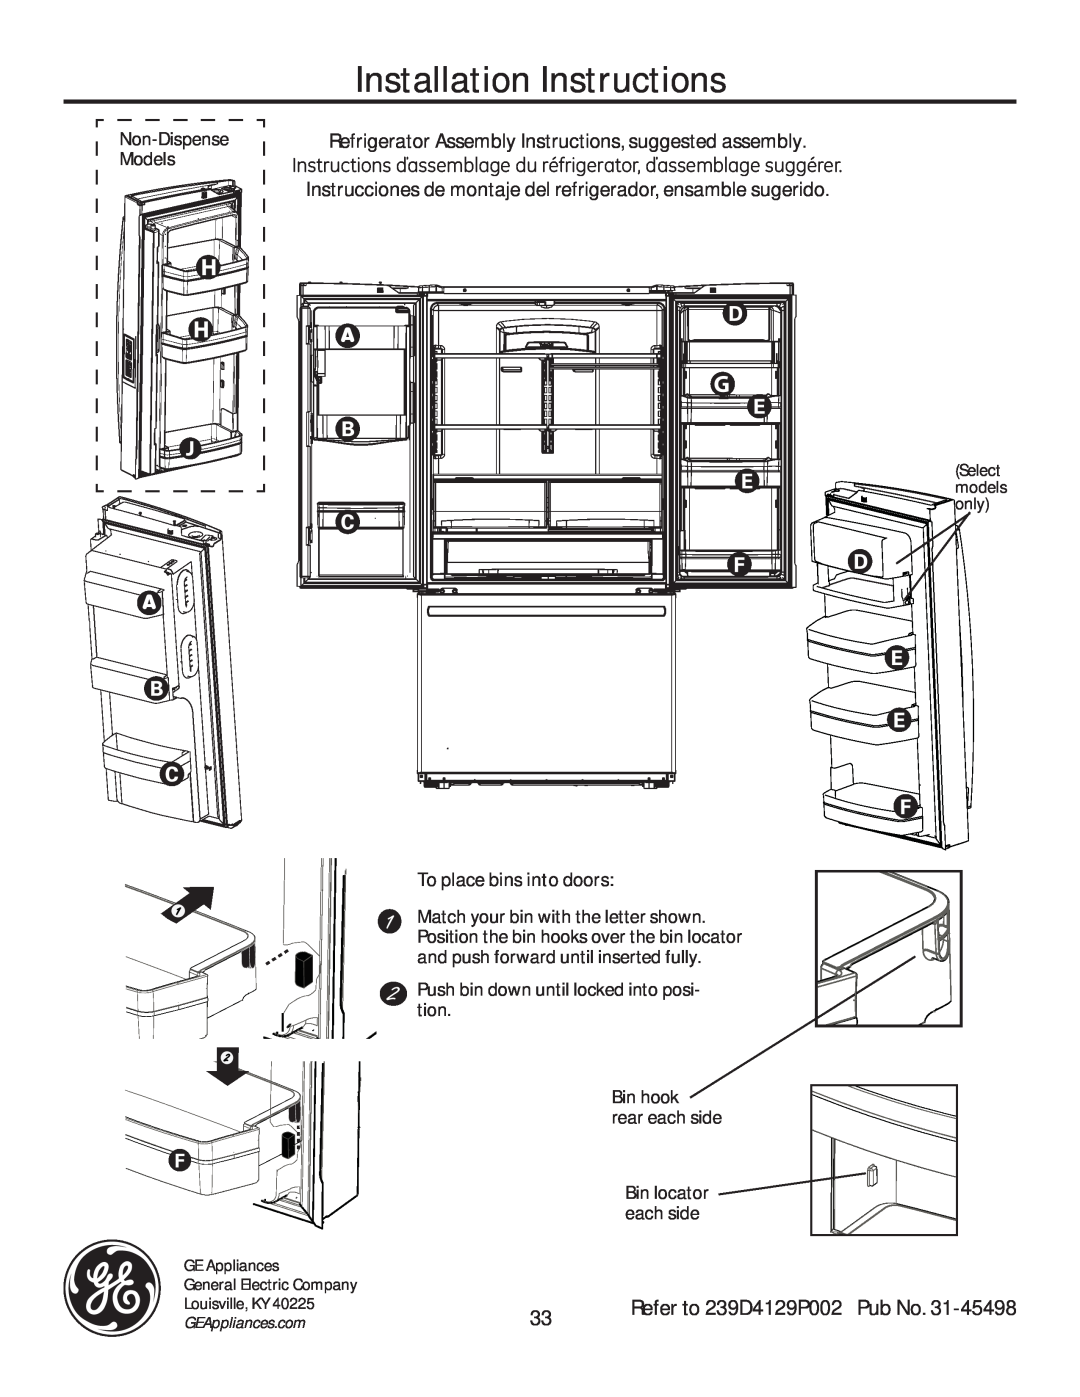 GE GFE28HGHBB Installation Instructions, Non-Dispense, Refrigerator Assembly Instructions, suggested assembly, Models 